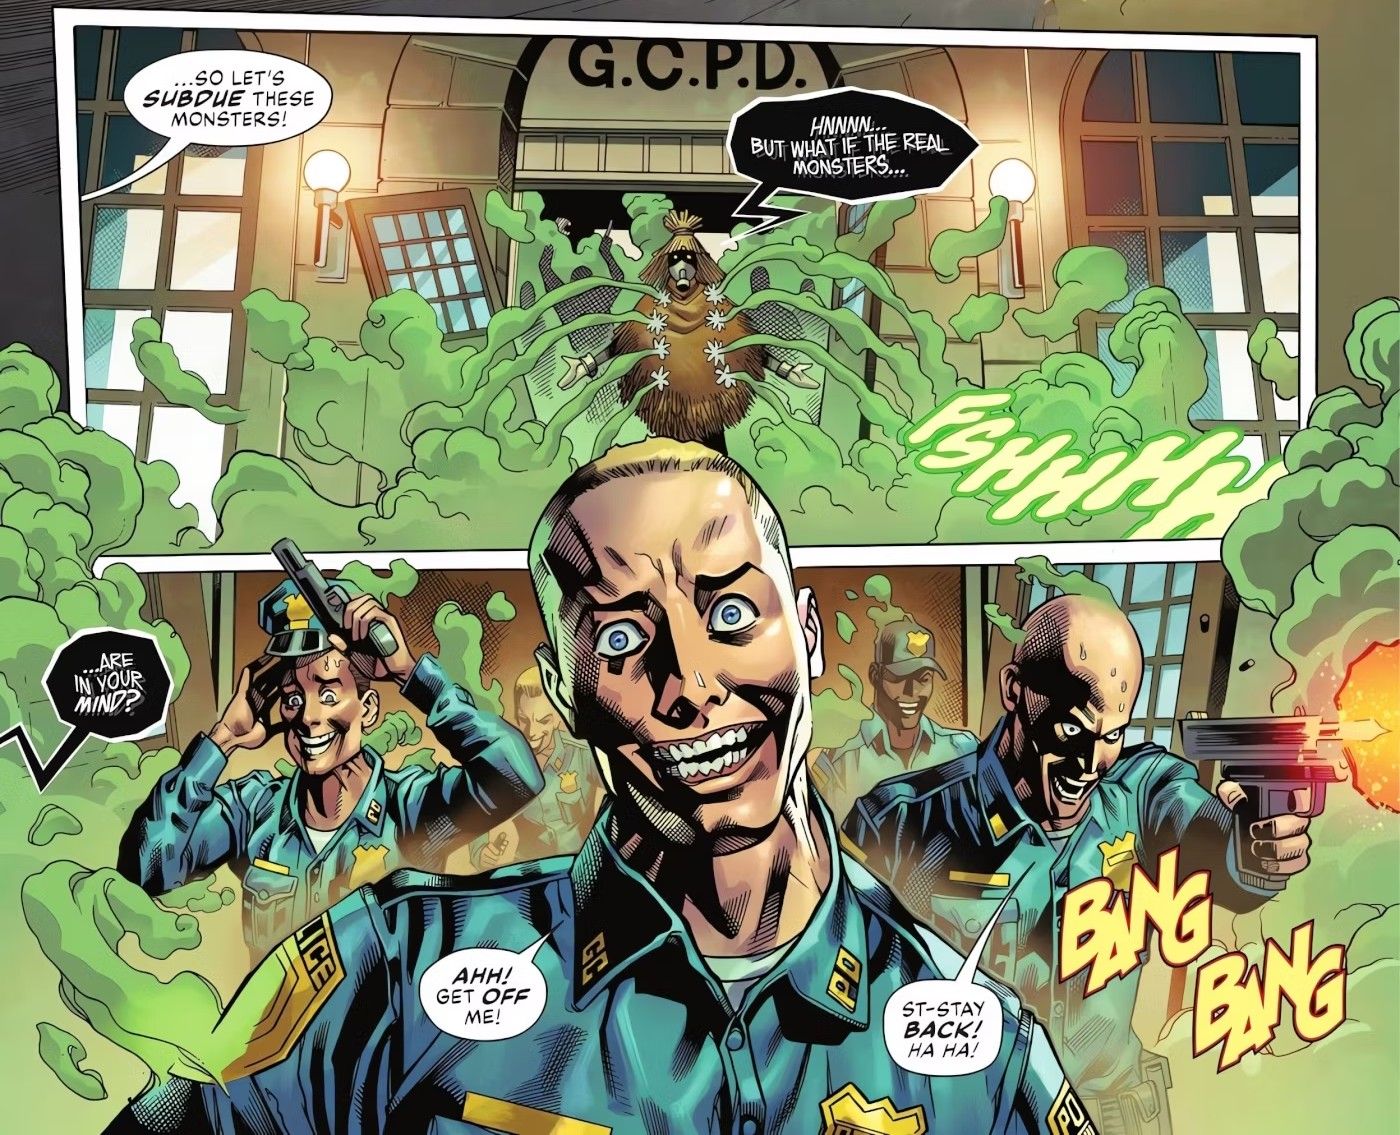 DC Steals the Arkhamverse’s Conclusion by Upgrading Scarecrow to a Joker-Level Threat